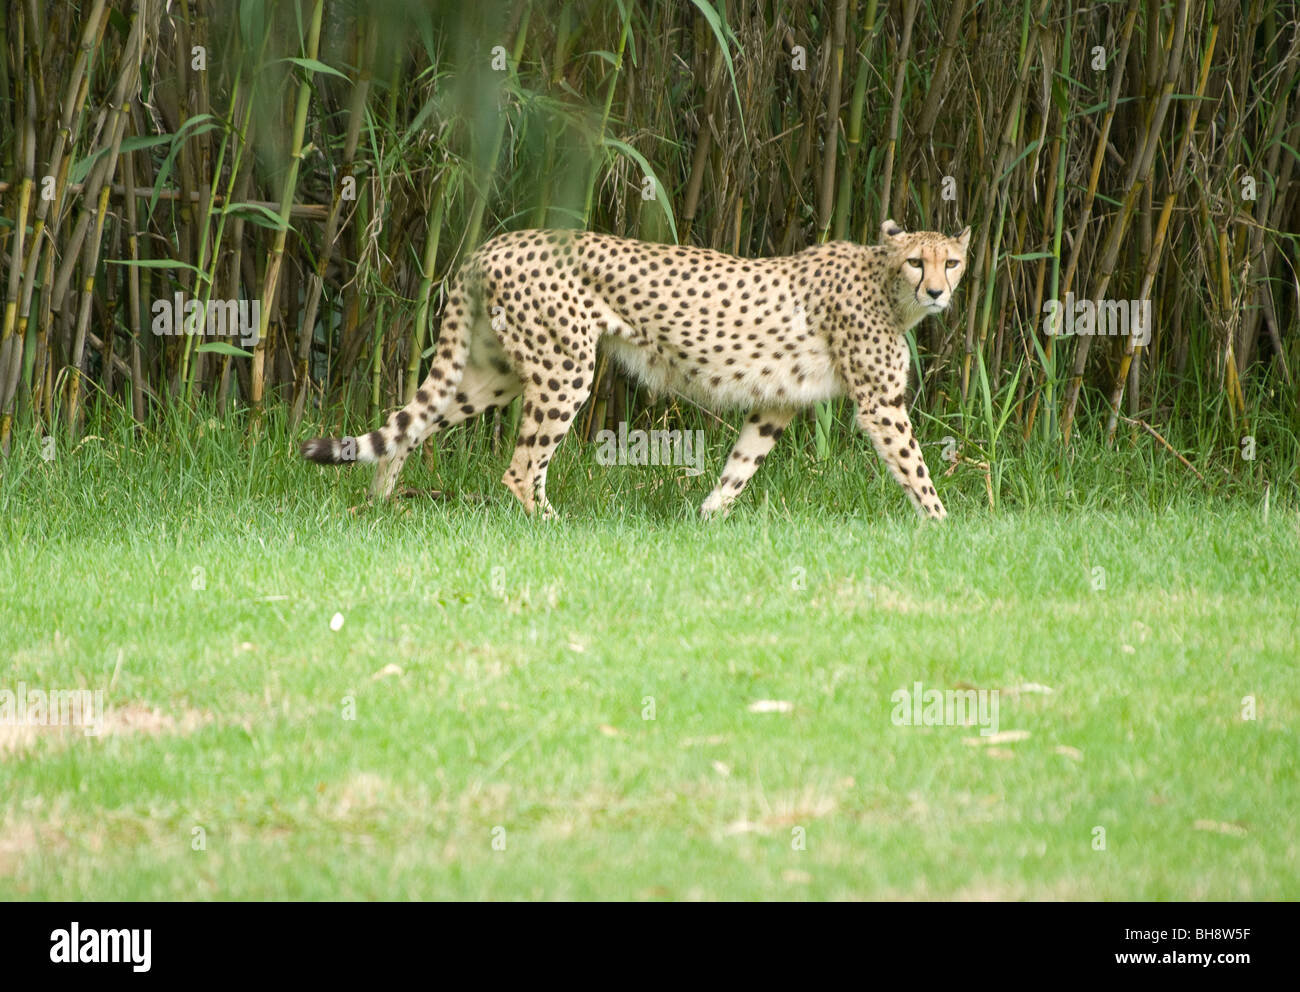 great image of a female spotted cheetah Stock Photo